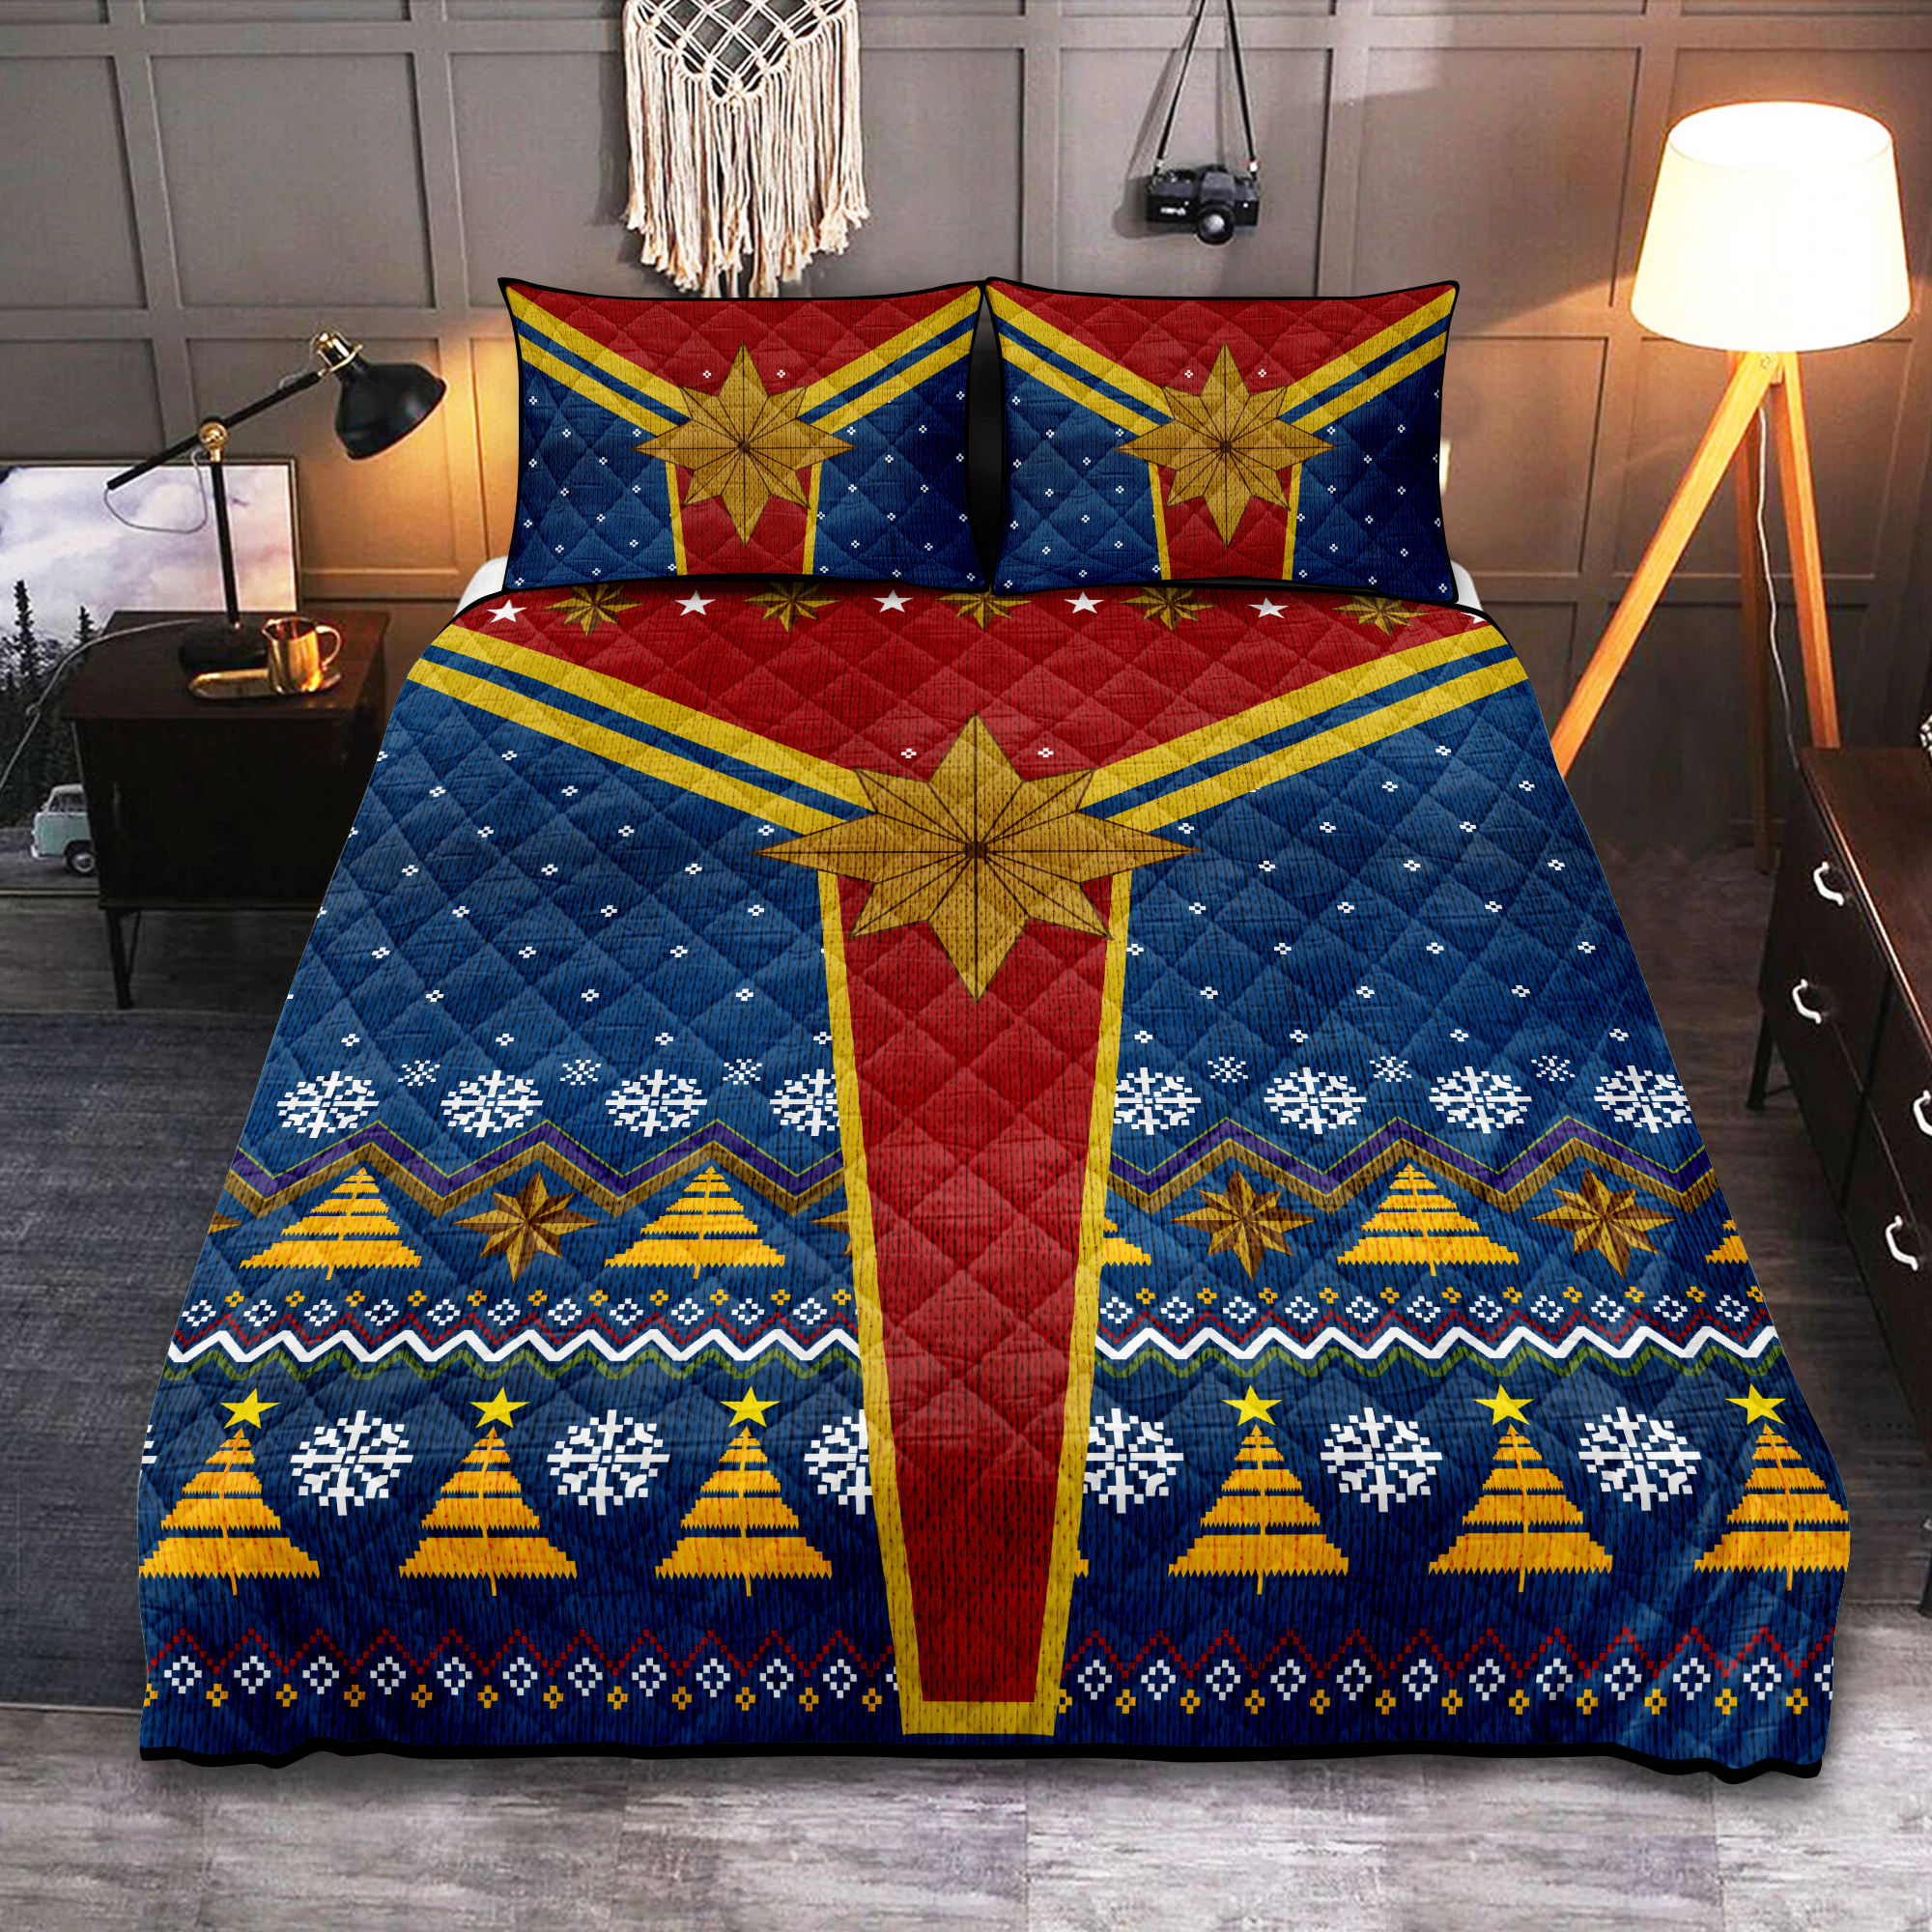 Captain Christmas Quilt Bed Sets Nearkii